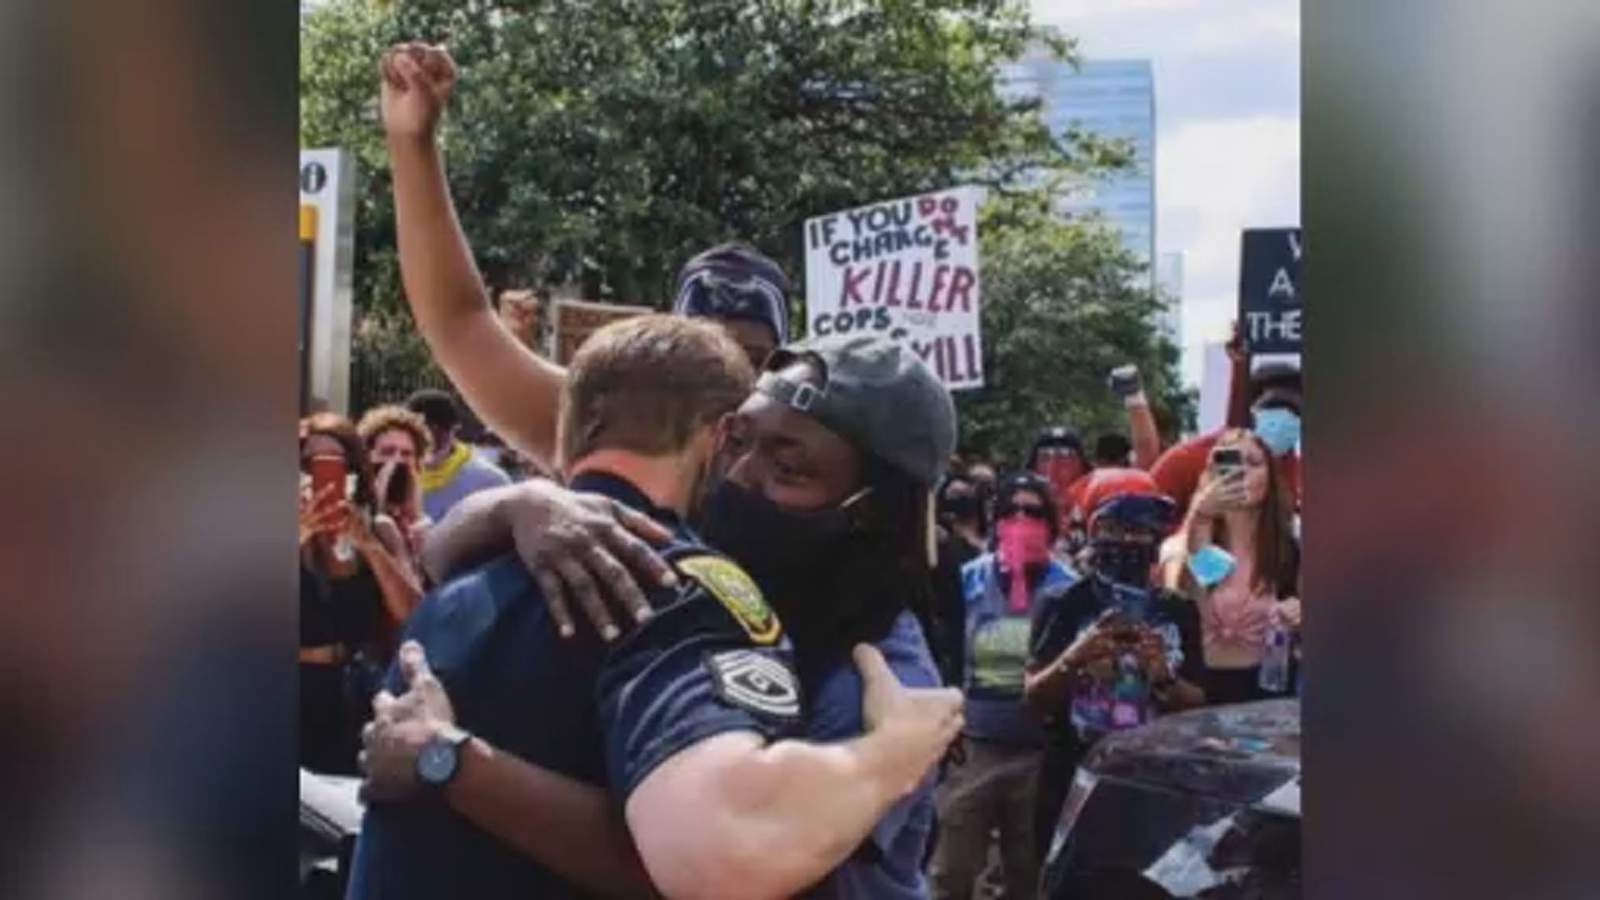 Photo of protester embracing HPD officer captures moment of unity